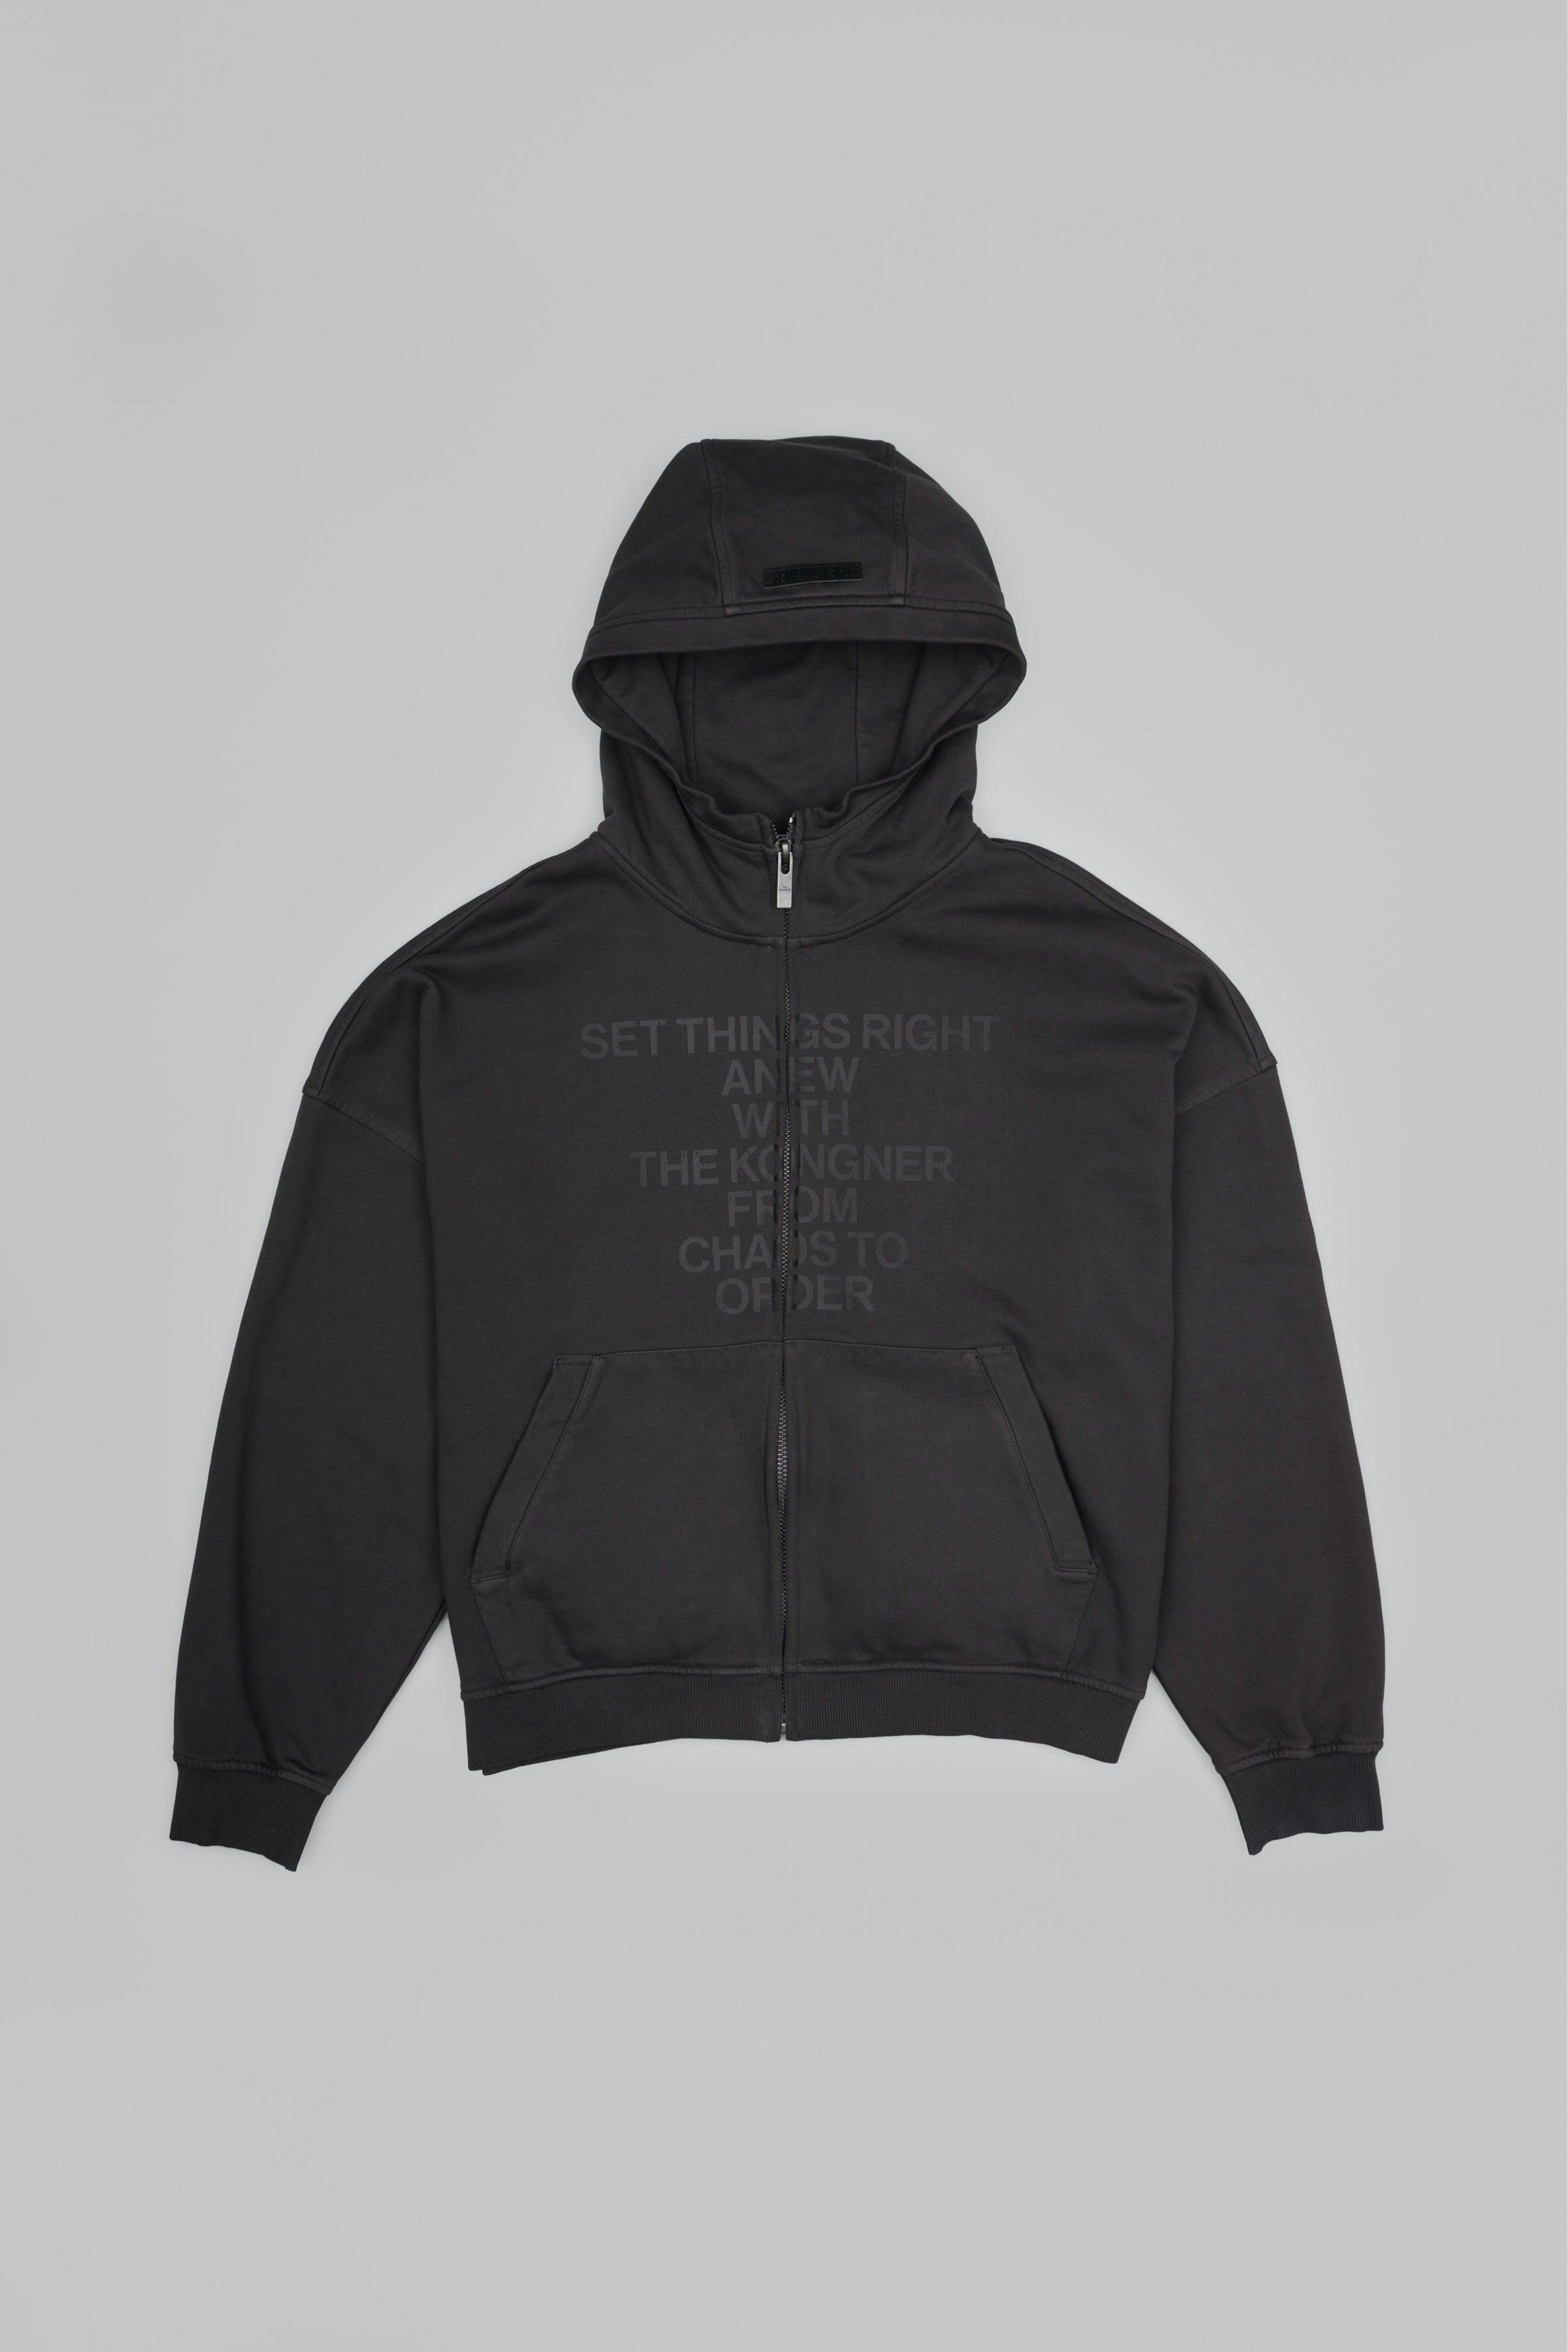 ˝CHAOS˝ Washed Zip-Up - Washed Charcoal